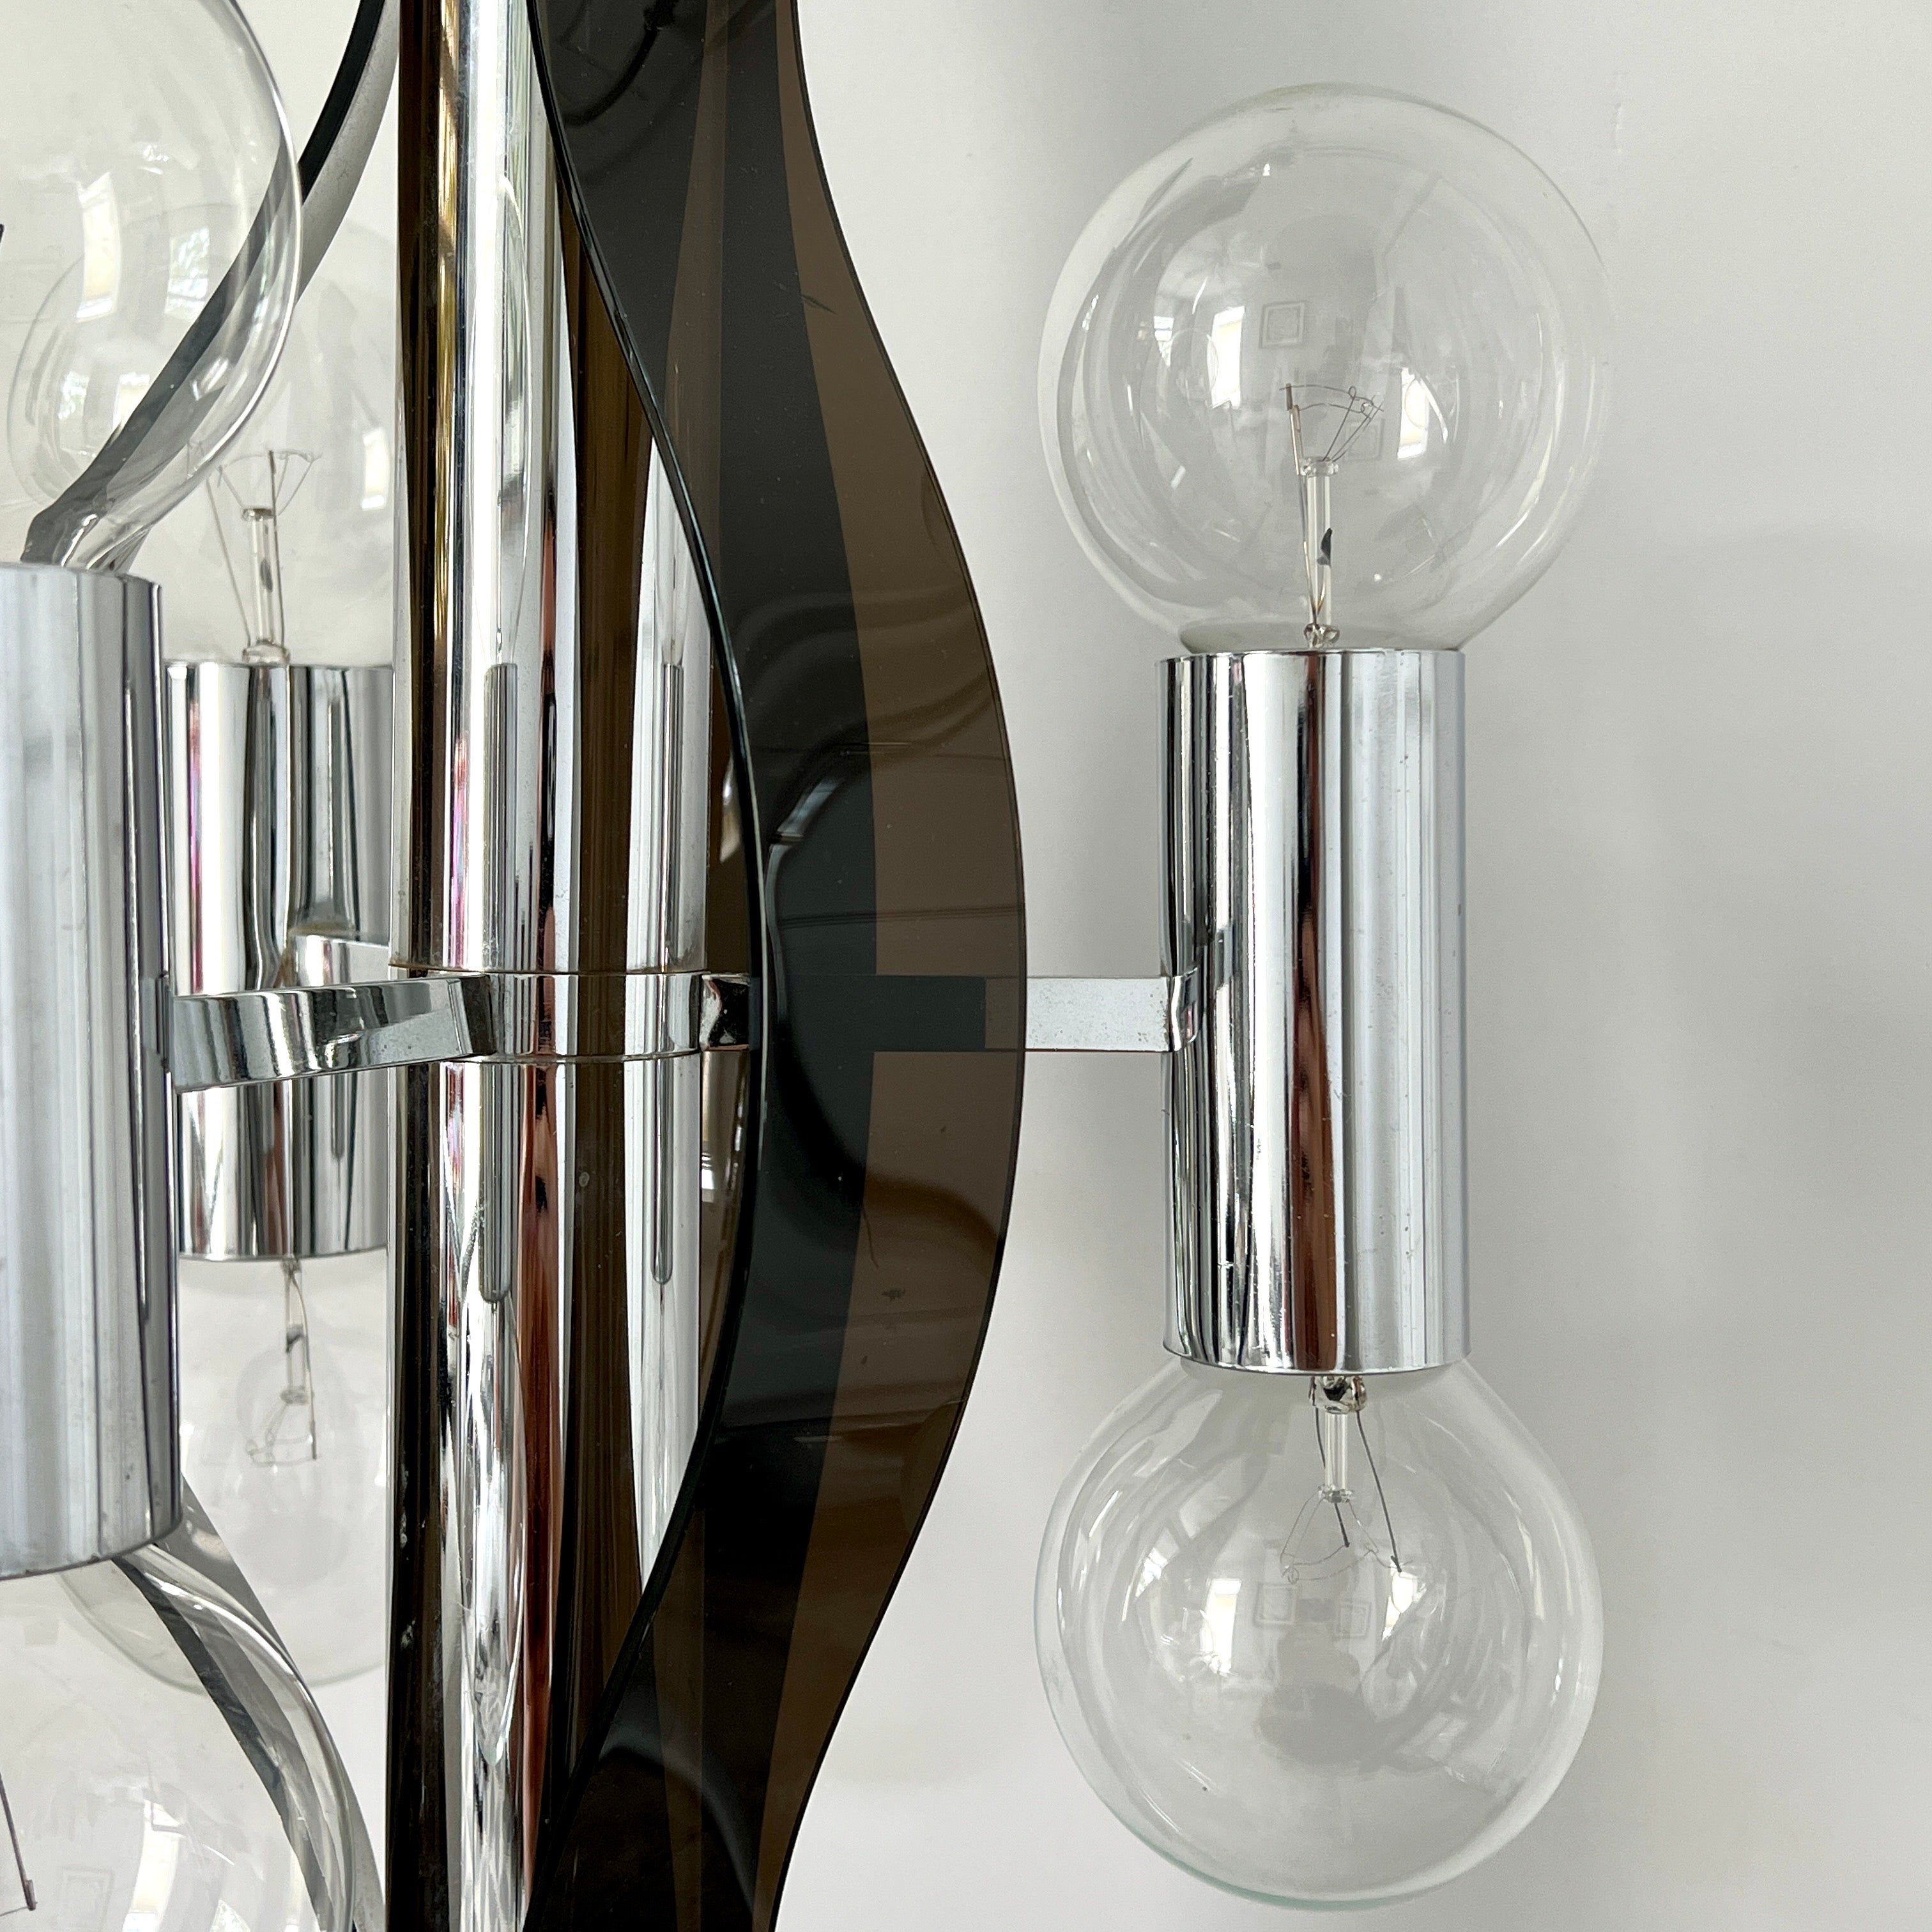 American Sculptural Chandelier in Chrome and Smoked Lucite, Robert Sonneman, c. 1970's For Sale